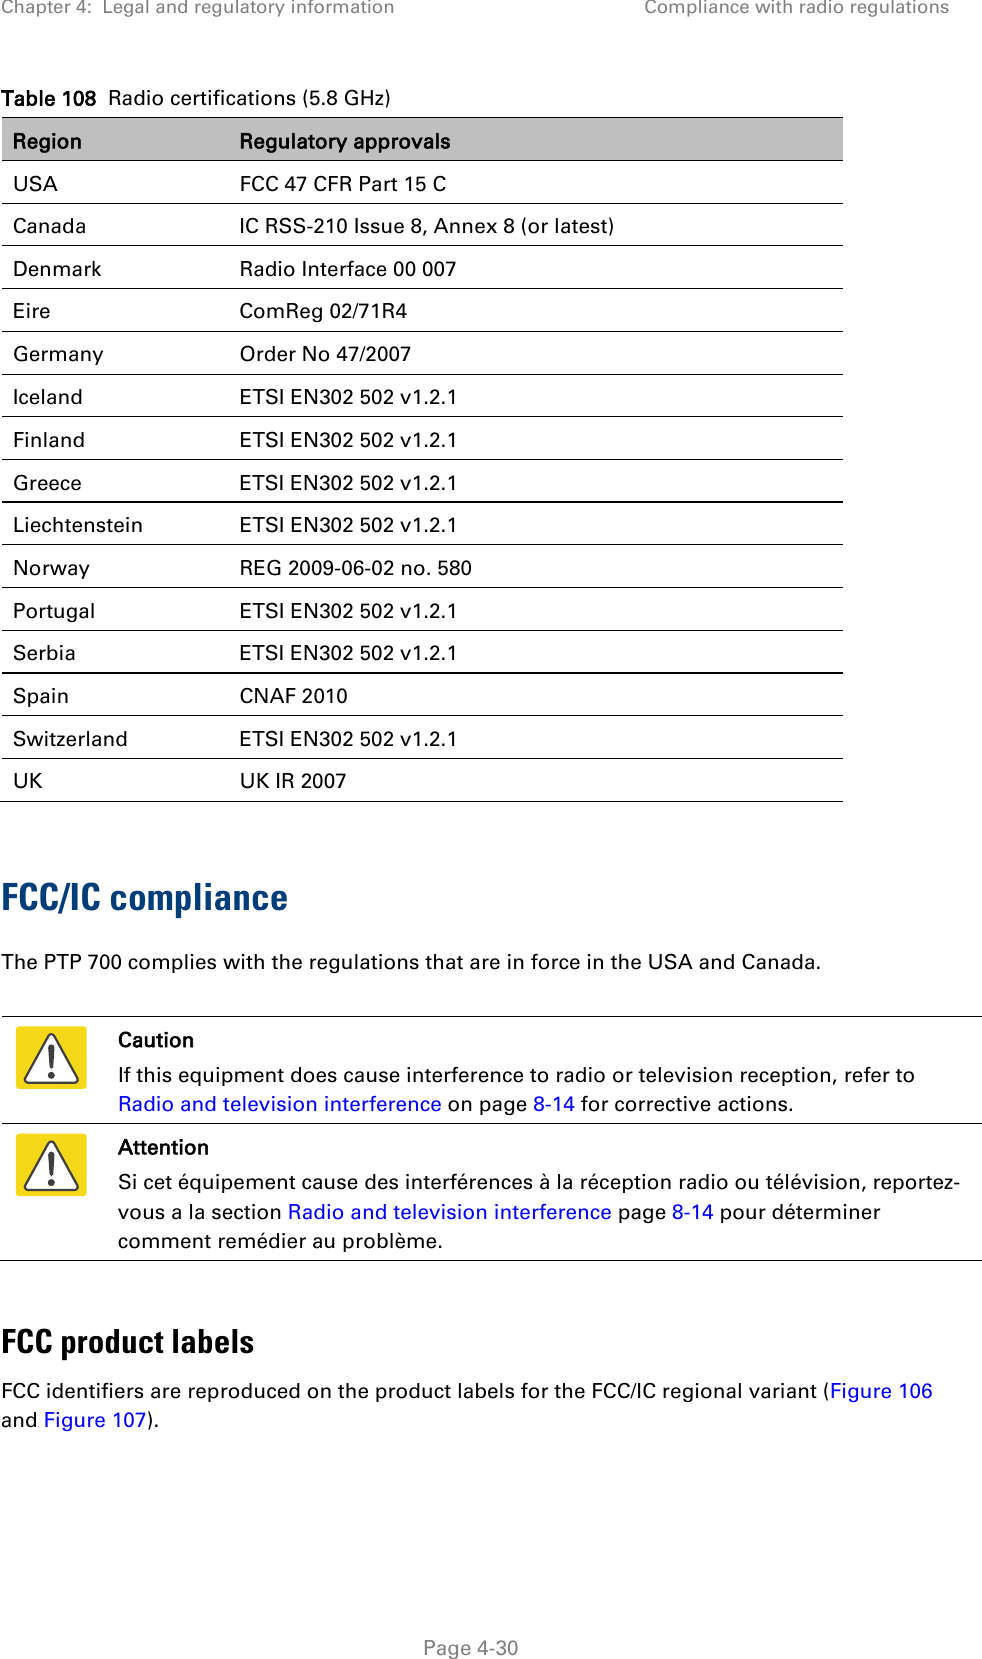 Chapter 4:  Legal and regulatory information Compliance with radio regulations  Table 108  Radio certifications (5.8 GHz) Region Regulatory approvals USA FCC 47 CFR Part 15 C Canada  IC RSS-210 Issue 8, Annex 8 (or latest) Denmark Radio Interface 00 007 Eire ComReg 02/71R4 Germany Order No 47/2007 Iceland ETSI EN302 502 v1.2.1 Finland ETSI EN302 502 v1.2.1 Greece ETSI EN302 502 v1.2.1 Liechtenstein ETSI EN302 502 v1.2.1 Norway  REG 2009-06-02 no. 580 Portugal ETSI EN302 502 v1.2.1 Serbia ETSI EN302 502 v1.2.1 Spain CNAF 2010 Switzerland ETSI EN302 502 v1.2.1 UK UK IR 2007  FCC/IC compliance The PTP 700 complies with the regulations that are in force in the USA and Canada.   Caution If this equipment does cause interference to radio or television reception, refer to Radio and television interference on page 8-14 for corrective actions.  Attention Si cet équipement cause des interférences à la réception radio ou télévision, reportez-vous a la section Radio and television interference page 8-14 pour déterminer comment remédier au problème.  FCC product labels FCC identifiers are reproduced on the product labels for the FCC/IC regional variant (Figure 106 and Figure 107).  Page 4-30 